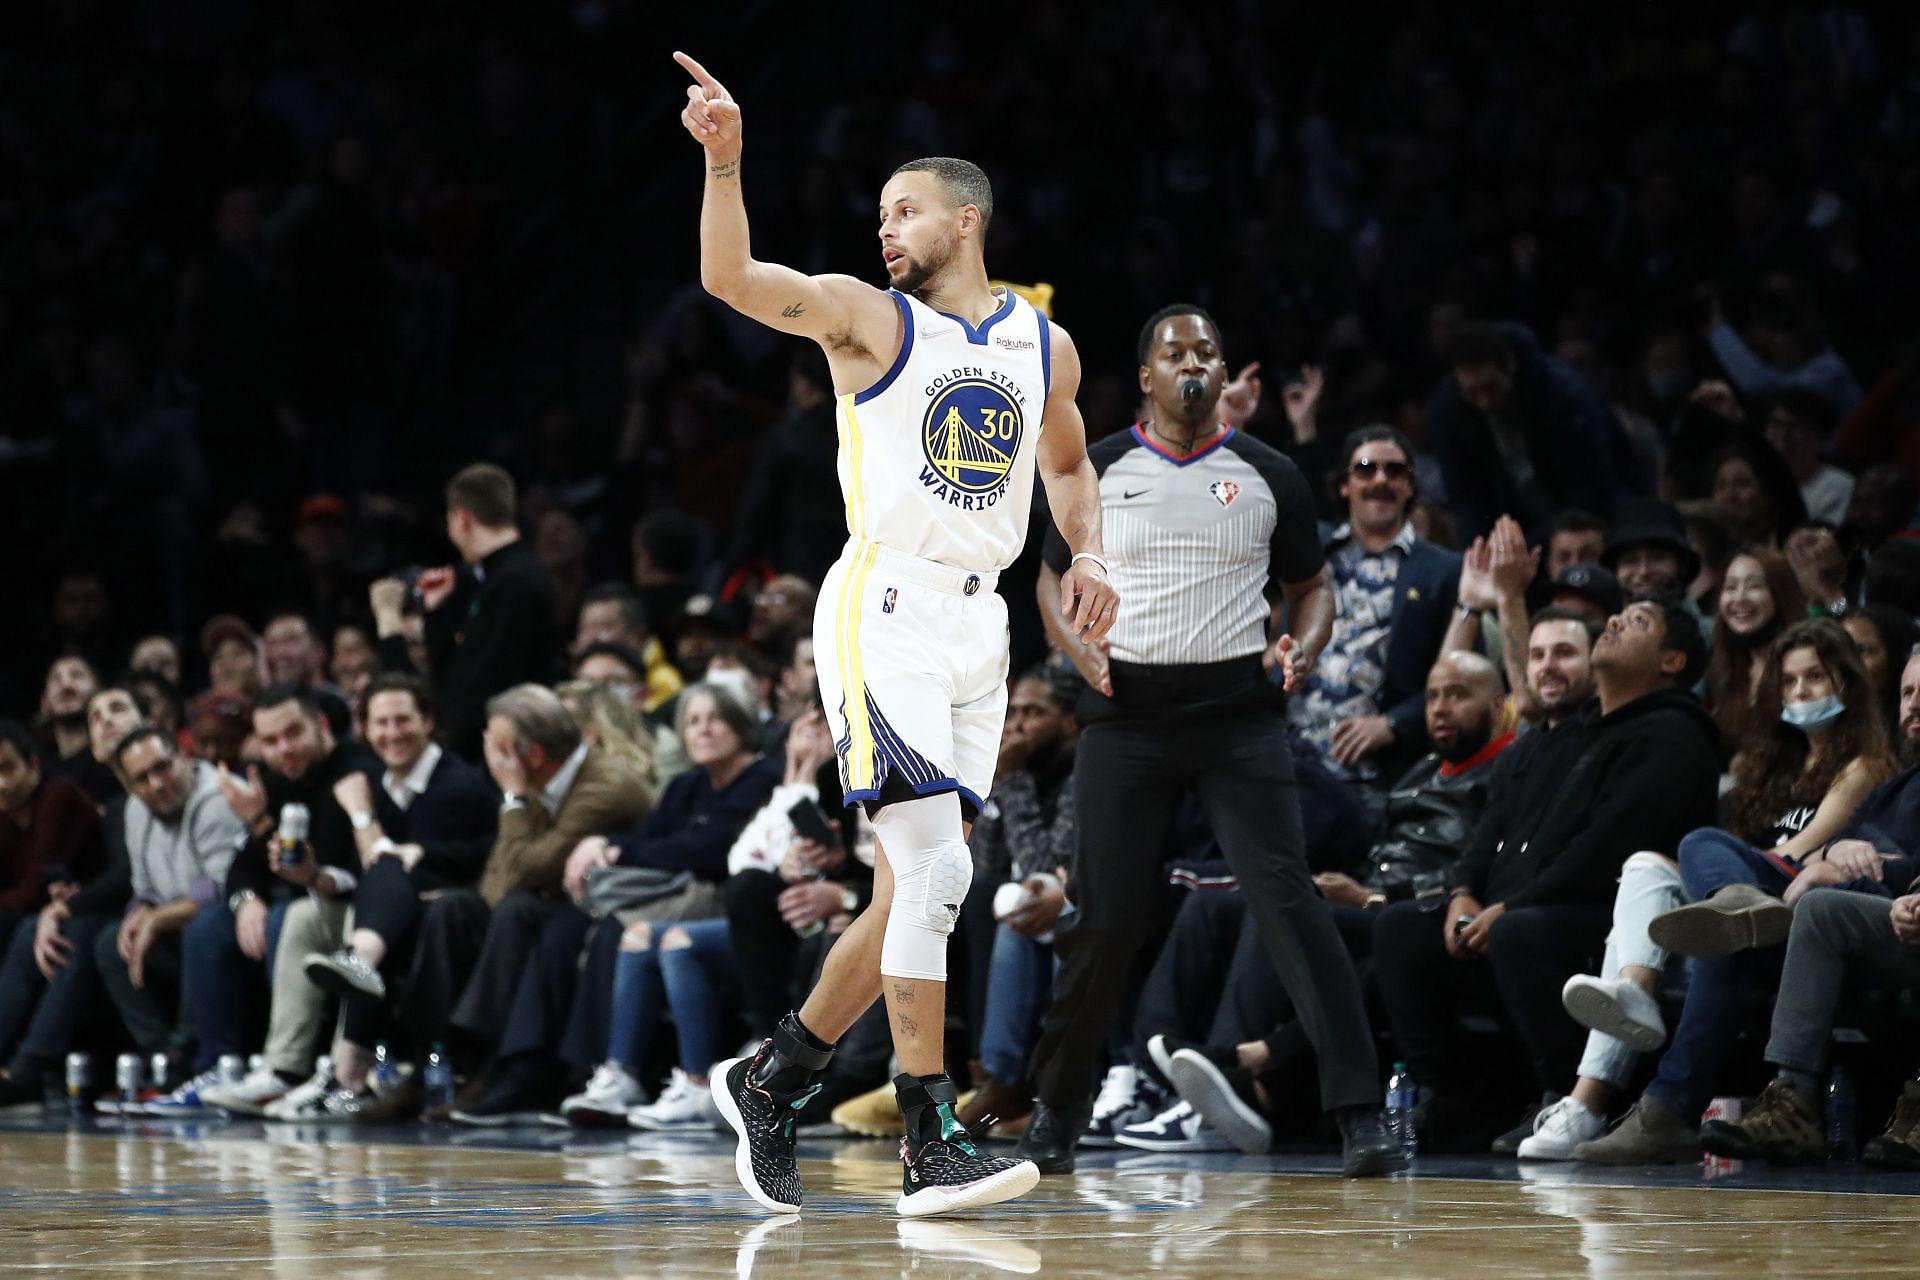 Stephen Curry of the Golden State Warriors reacts after making a basket during the second half against the Brooklyn Nets on Nov. 16, 2021.